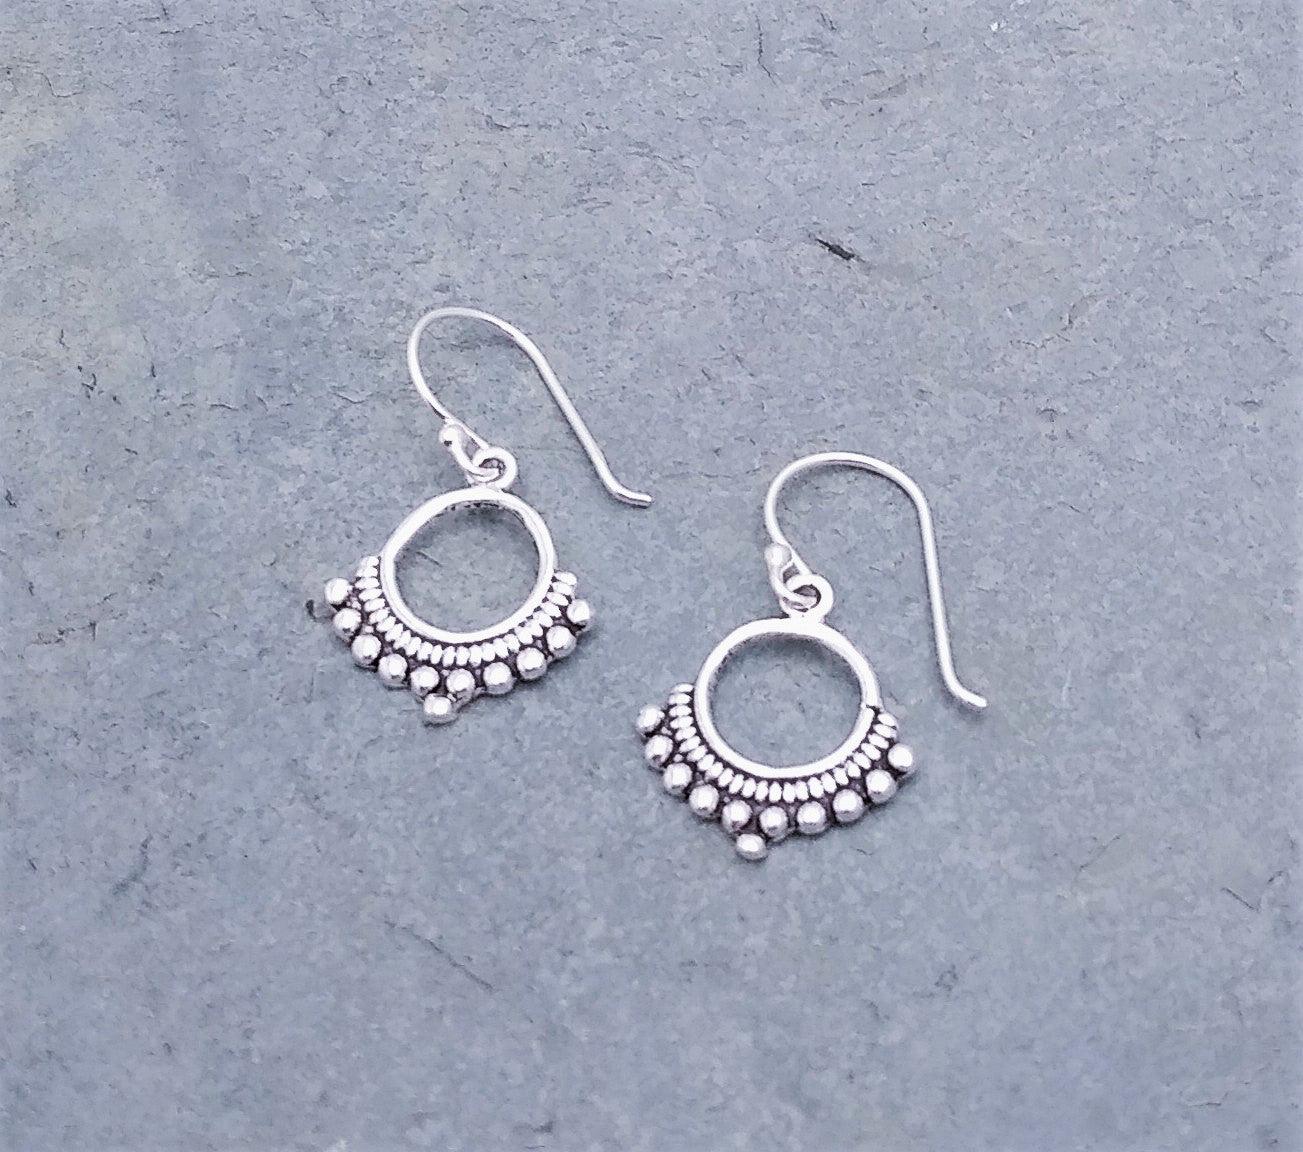 Sterling silver dangle earrings with a circle-cutout middle and a bali design along the bottom. On a french wire